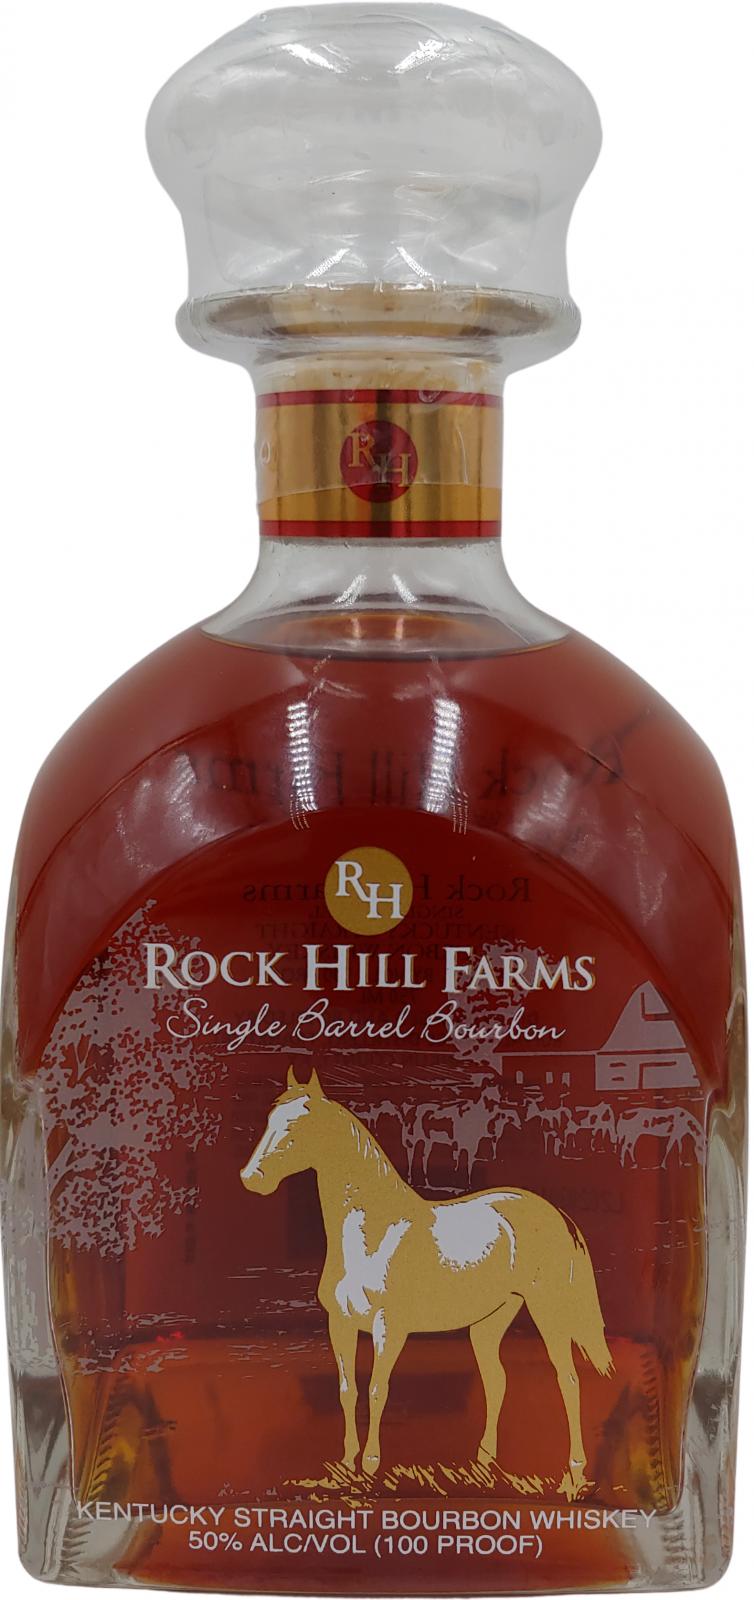 Rock Hill Farms Single Barrel Bourbon Ratings and reviews Whiskybase